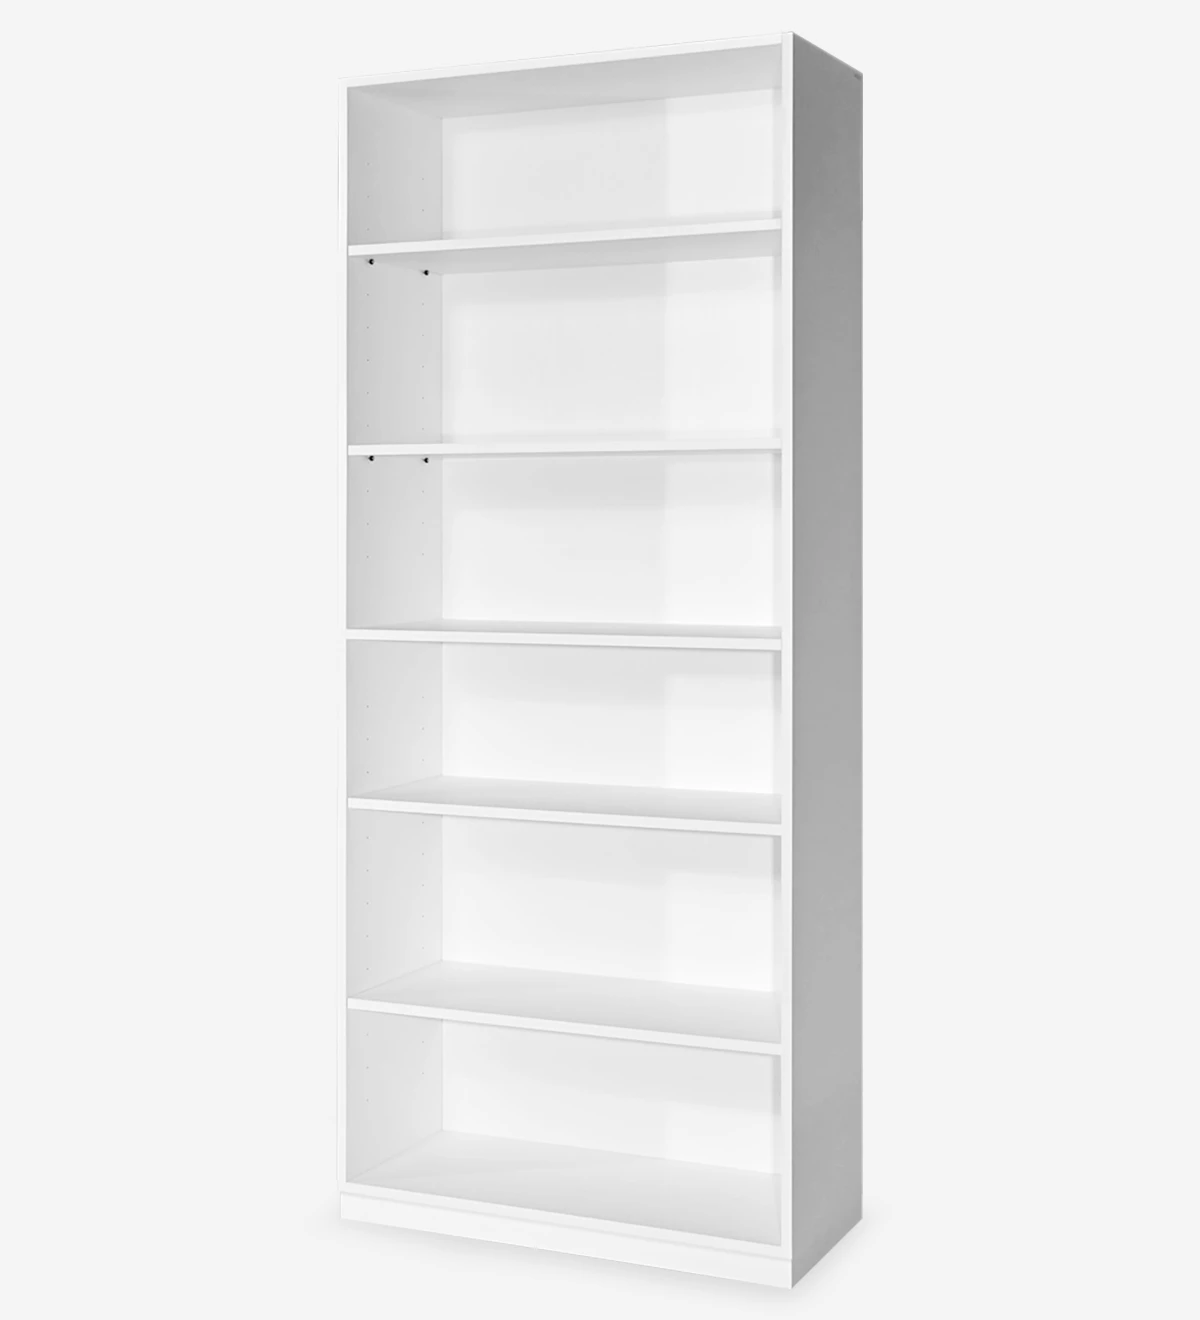 Tall bookcase cabinet in white oak, with removable shelves.